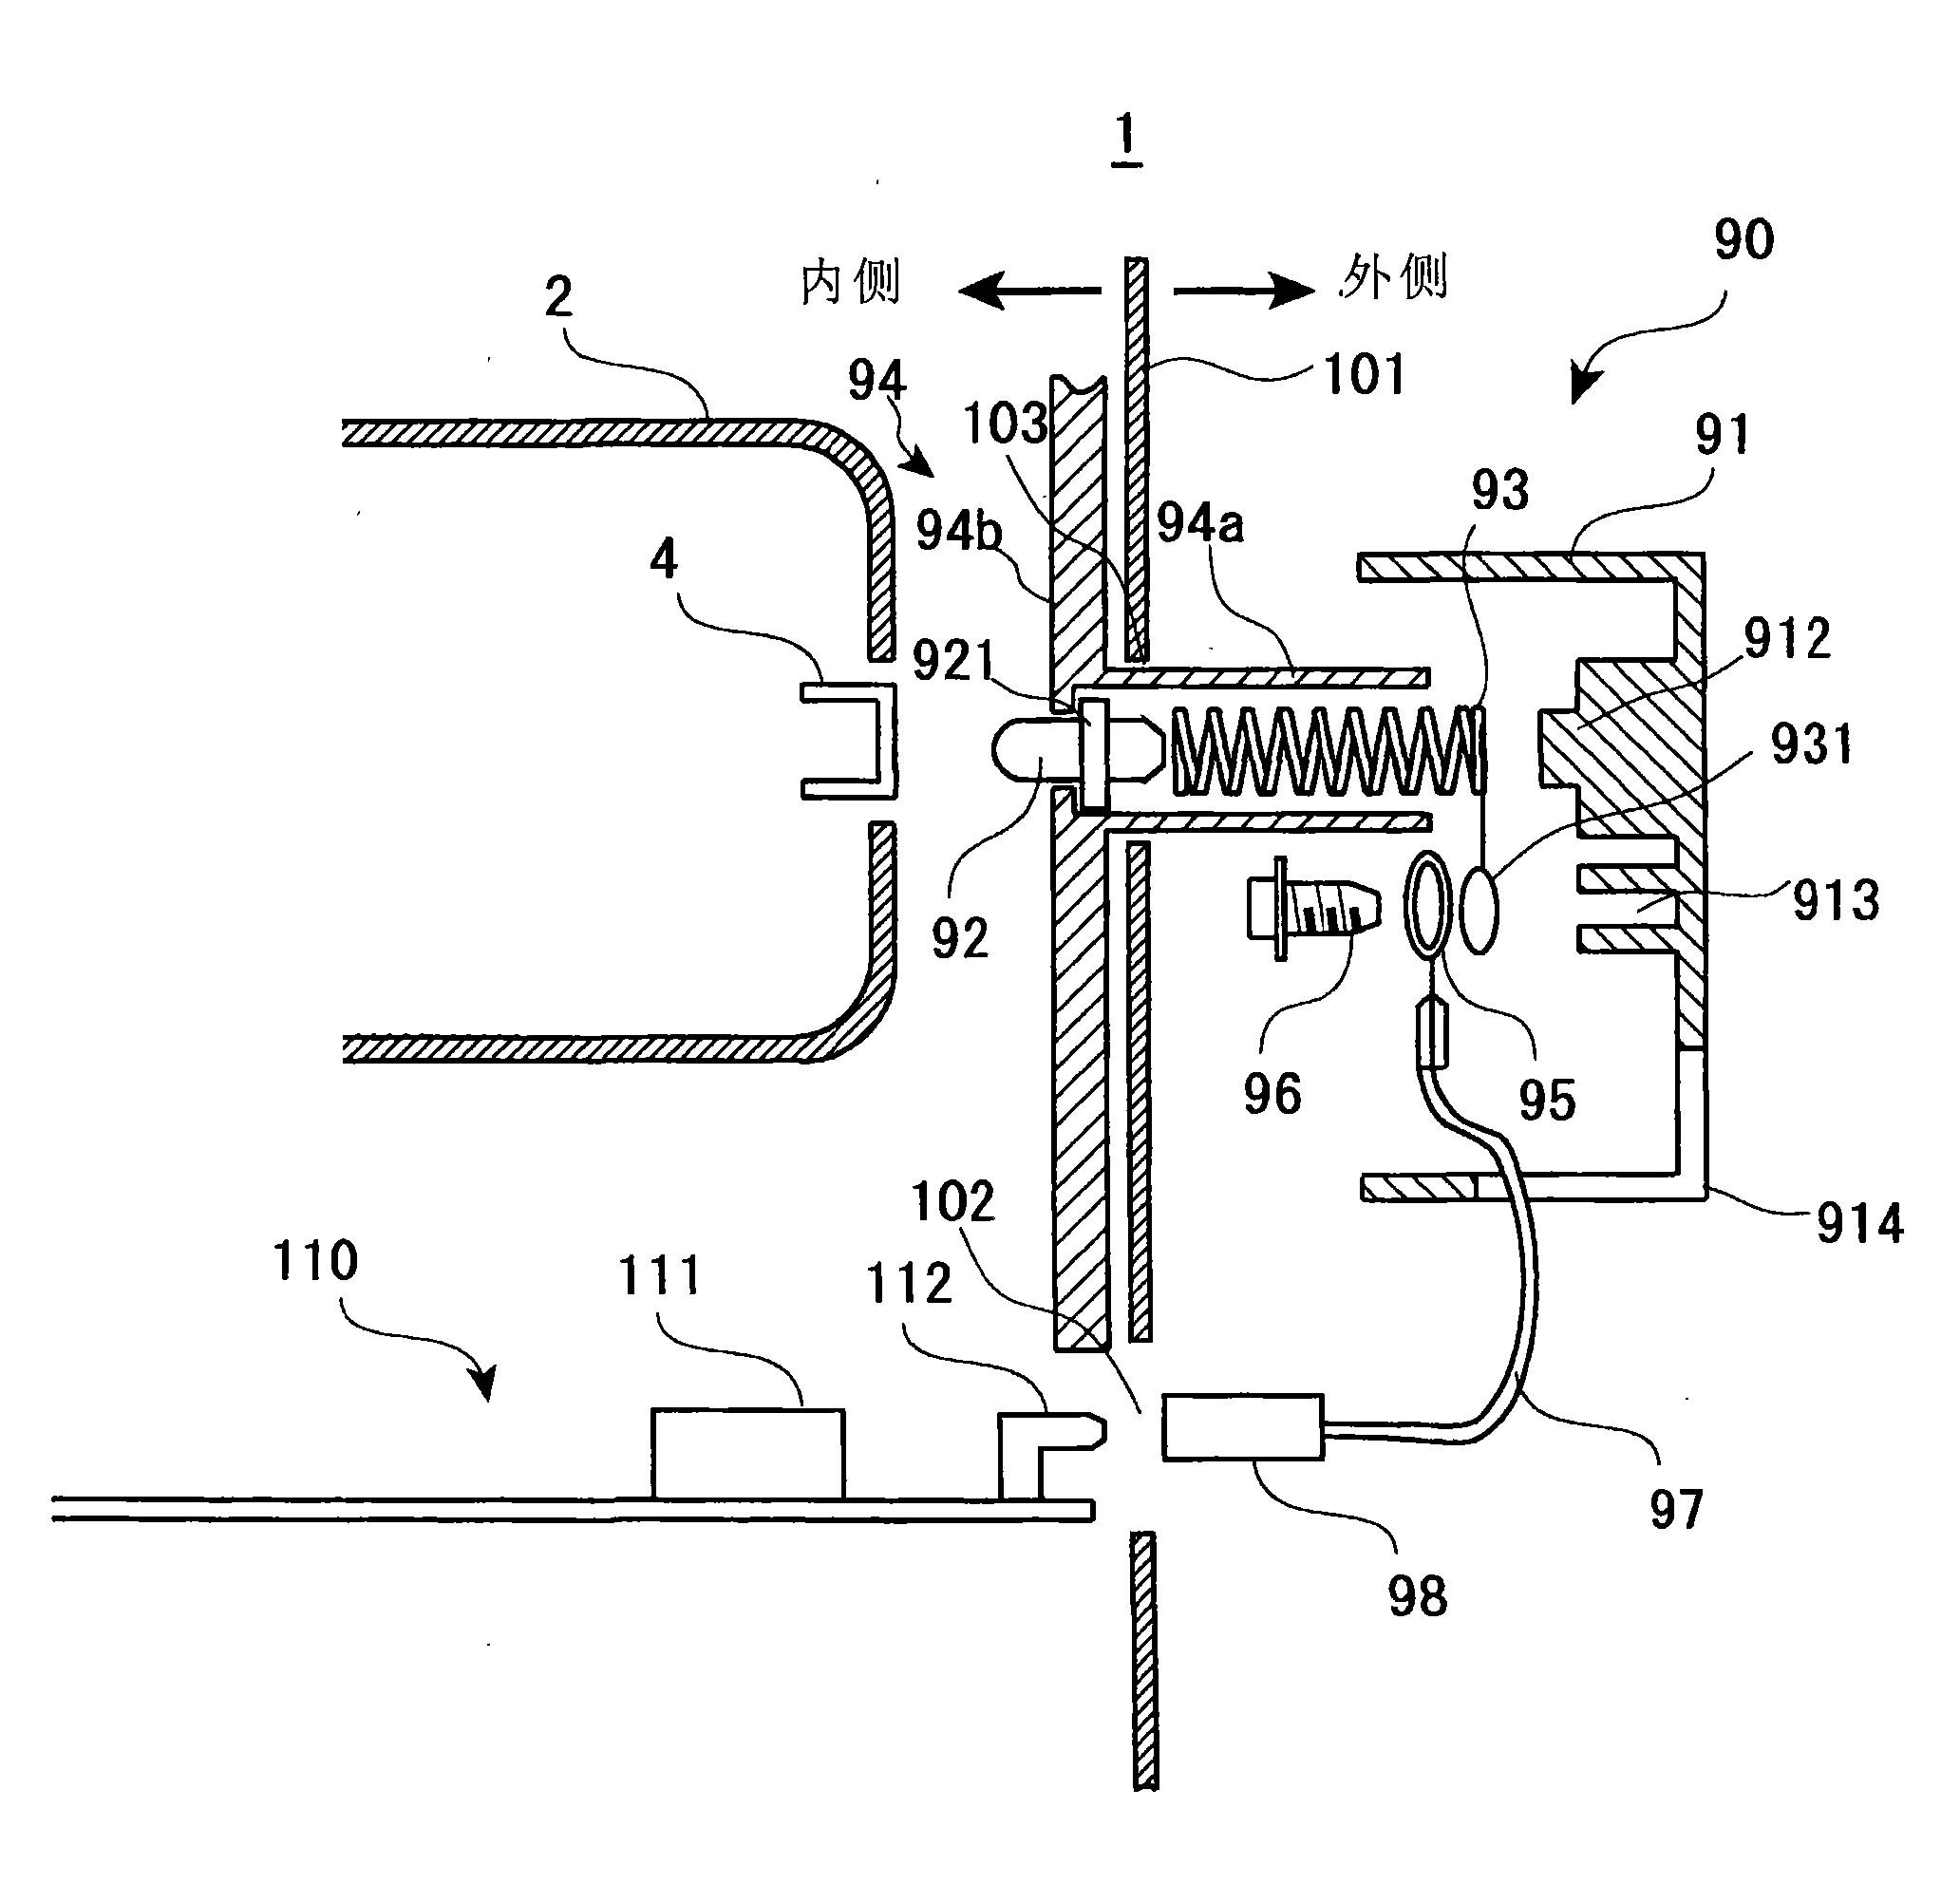 Power supply circuit, image forming device, power panel and processing unit